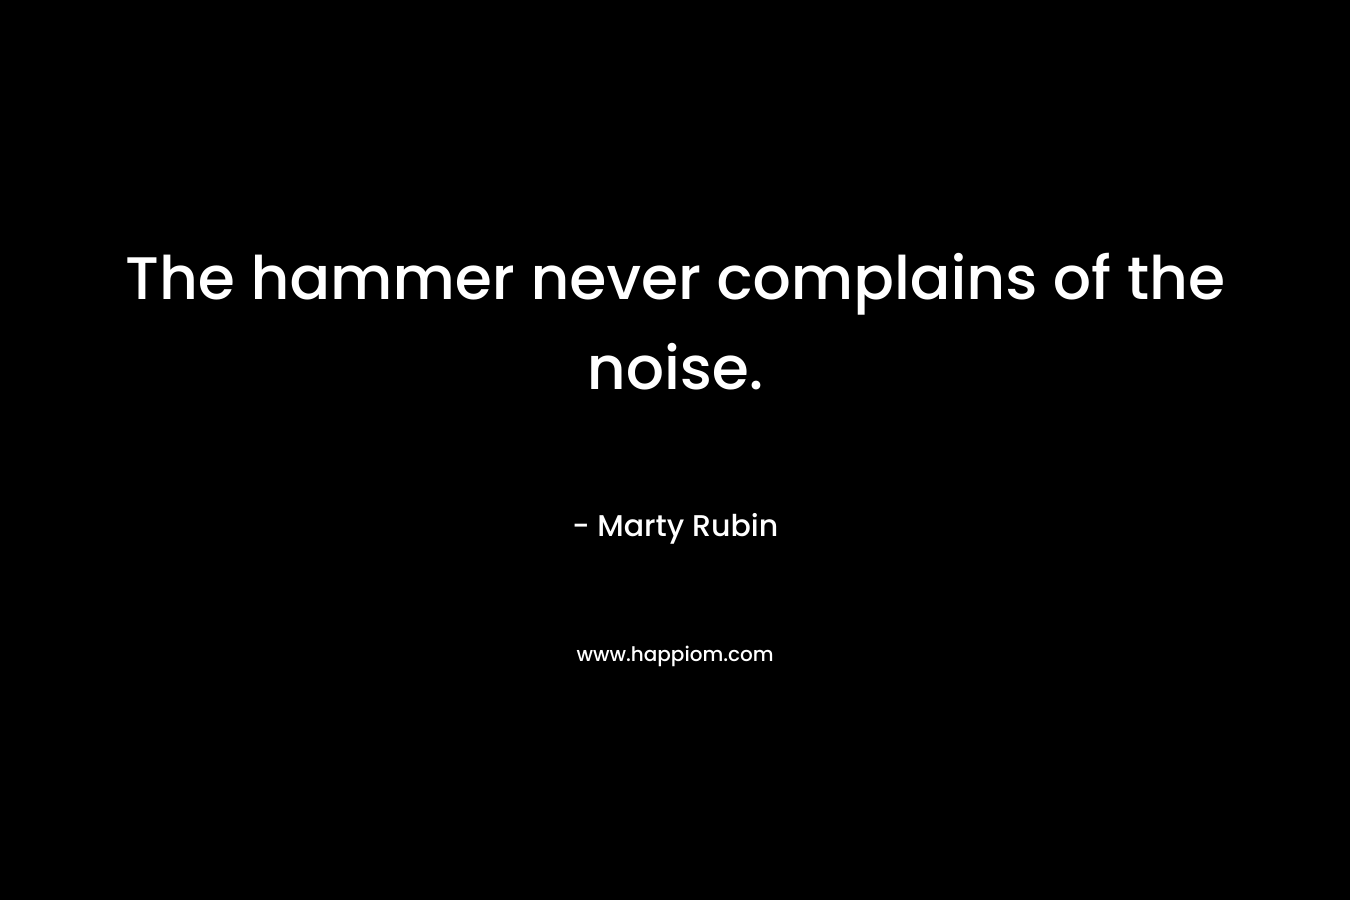 The hammer never complains of the noise. – Marty Rubin